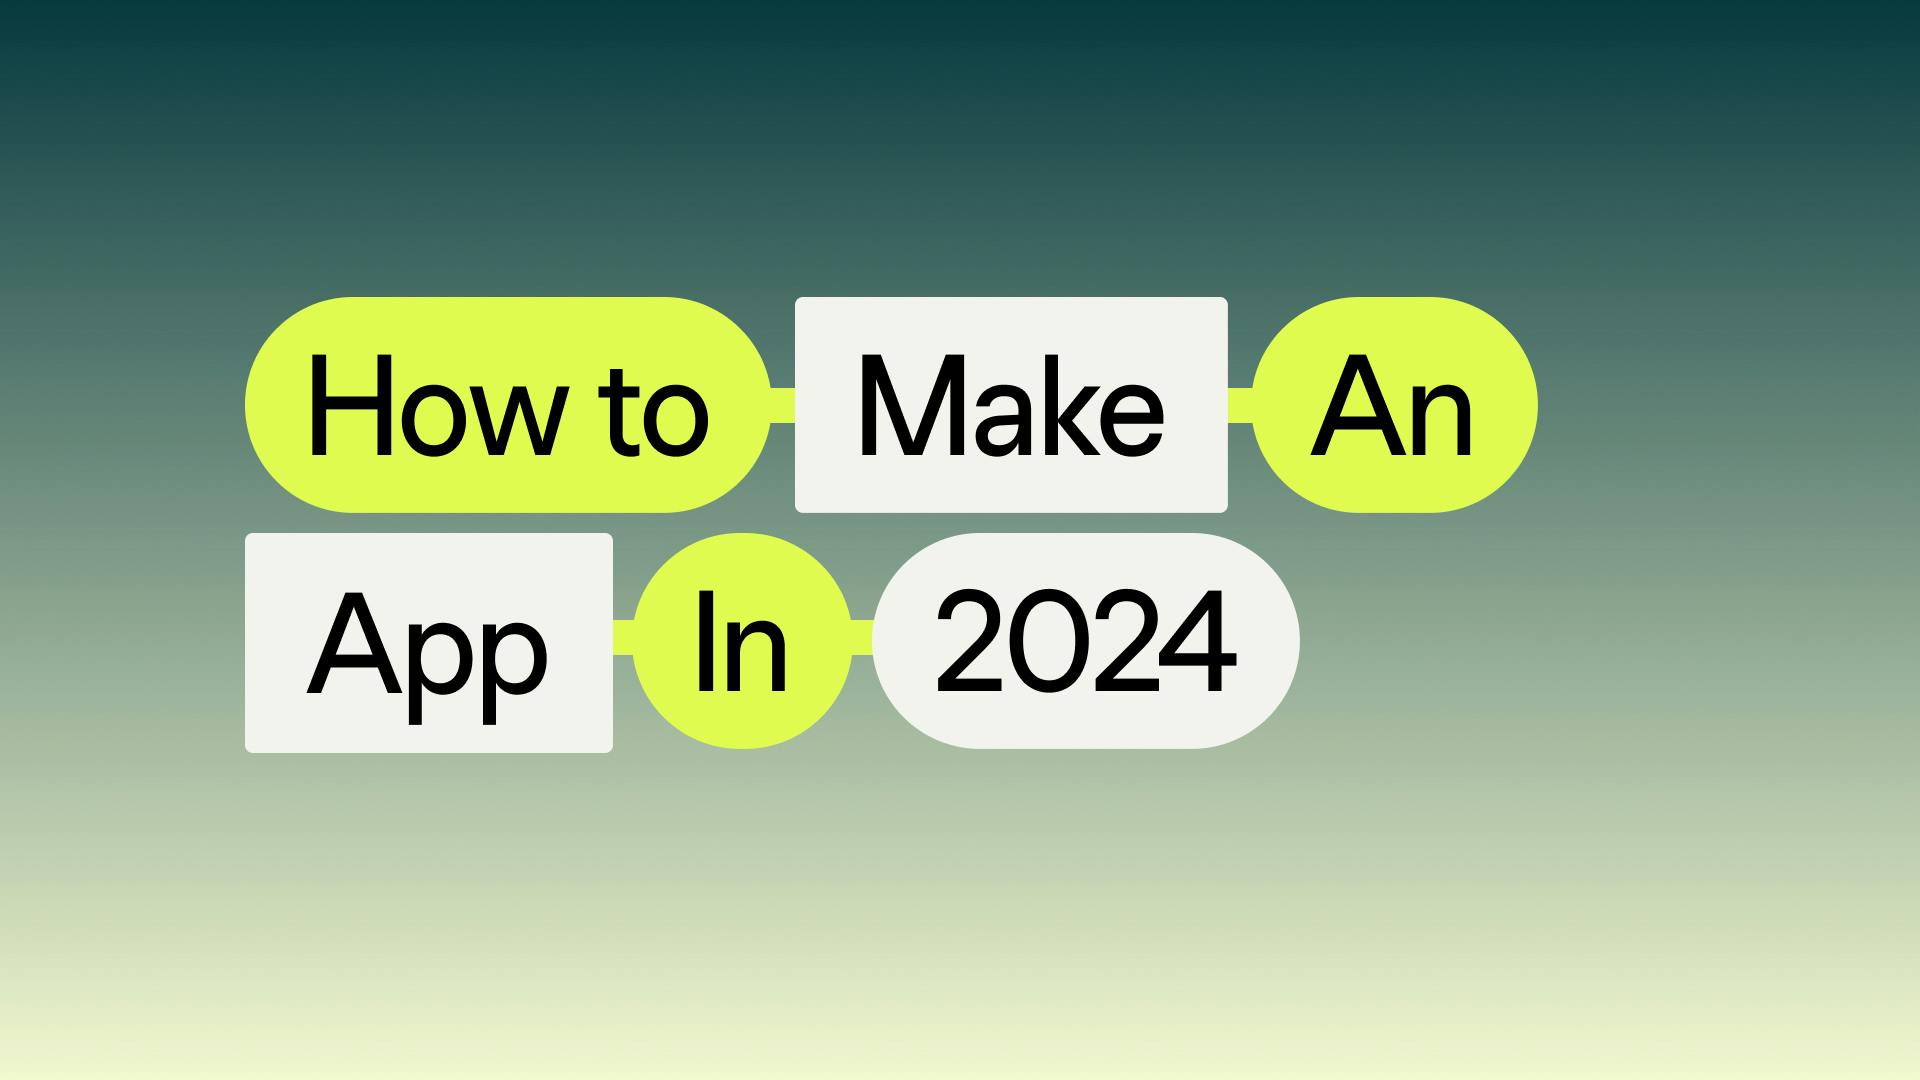 How to Make an App in 2024 - The Ultimate Guide